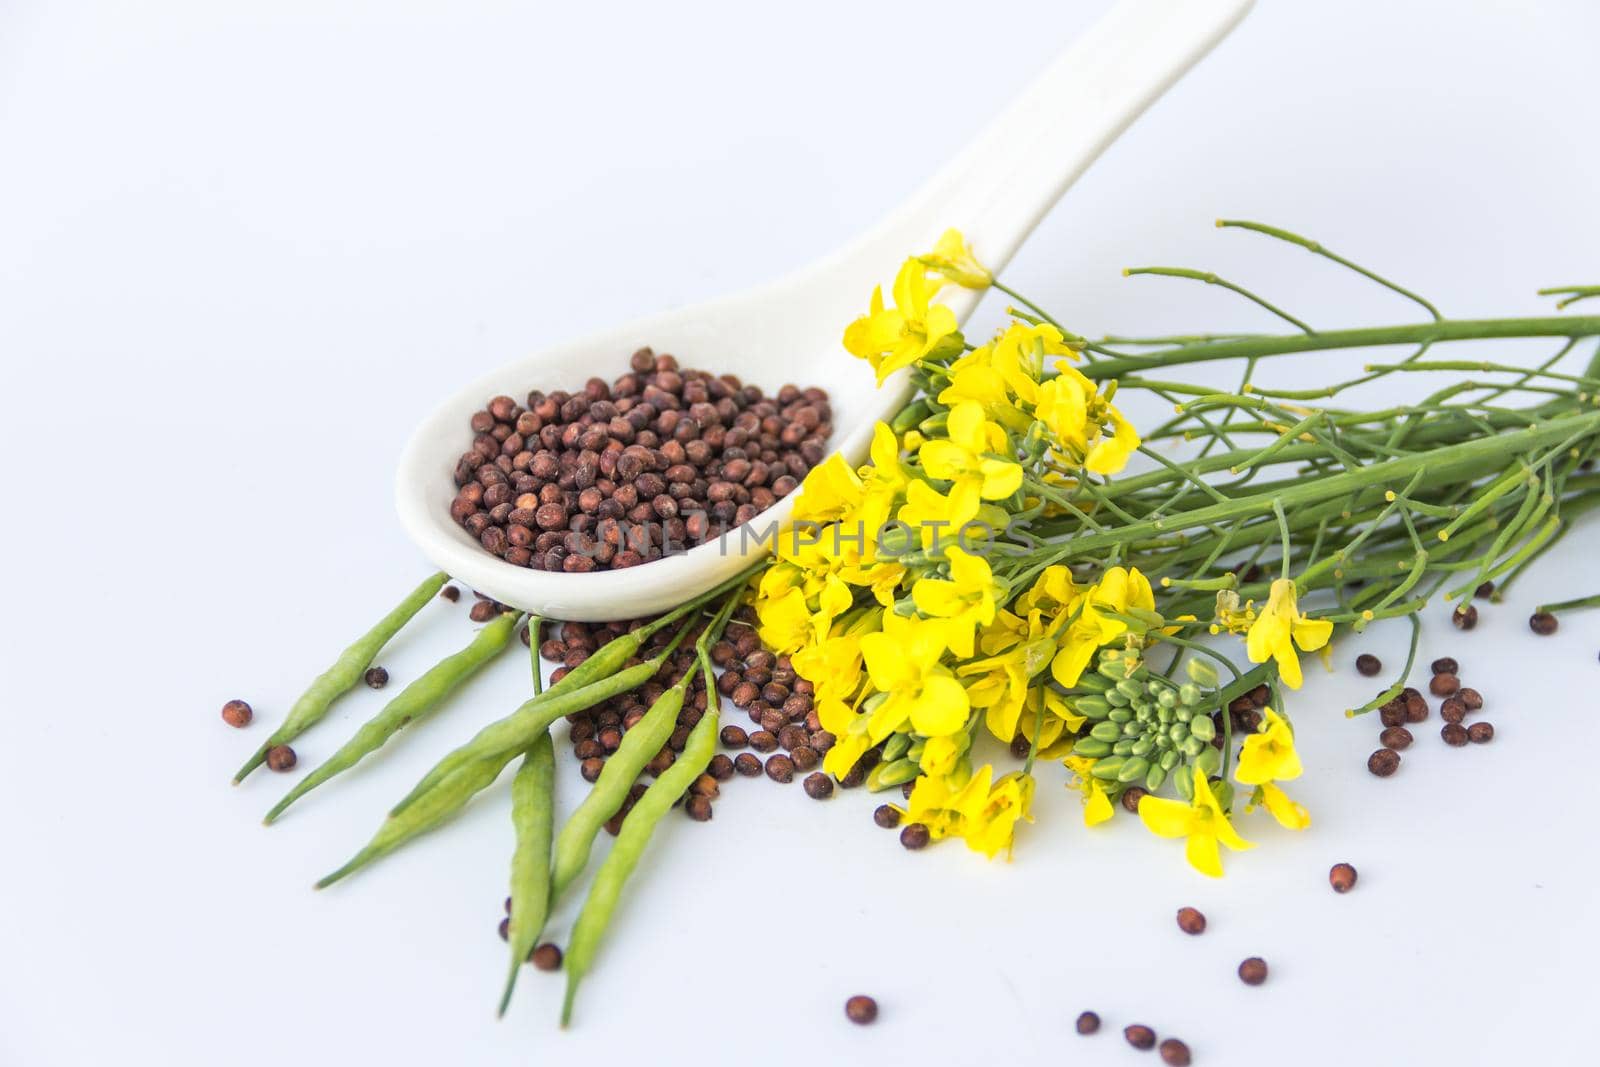 Canola seeds and yellow flowers on white background